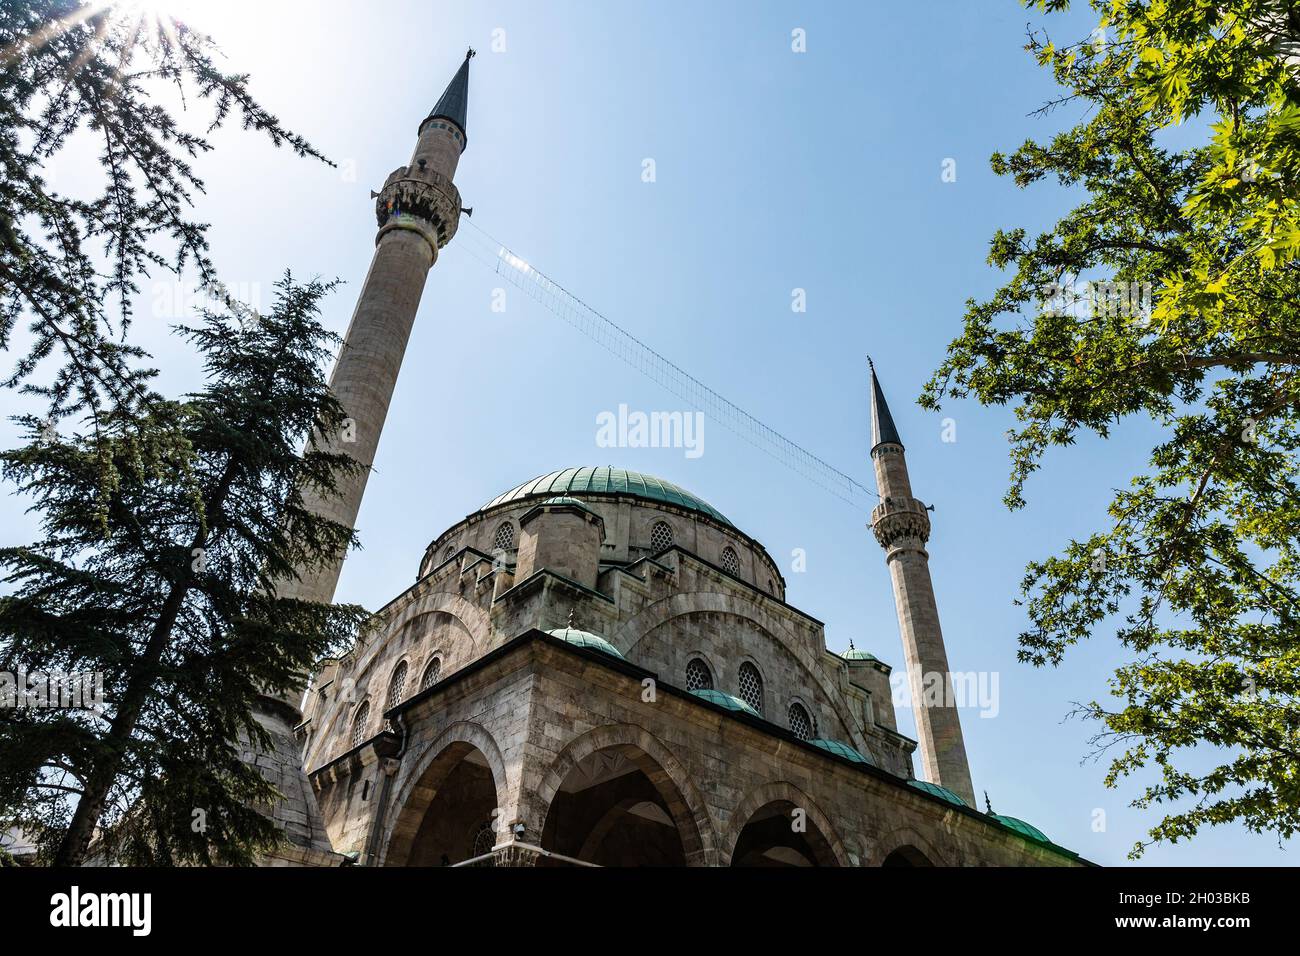 Ankara Maltepe Mosque Breathtaking Picturesque Frontal View on a Blue Sky Day in Summer Stock Photo